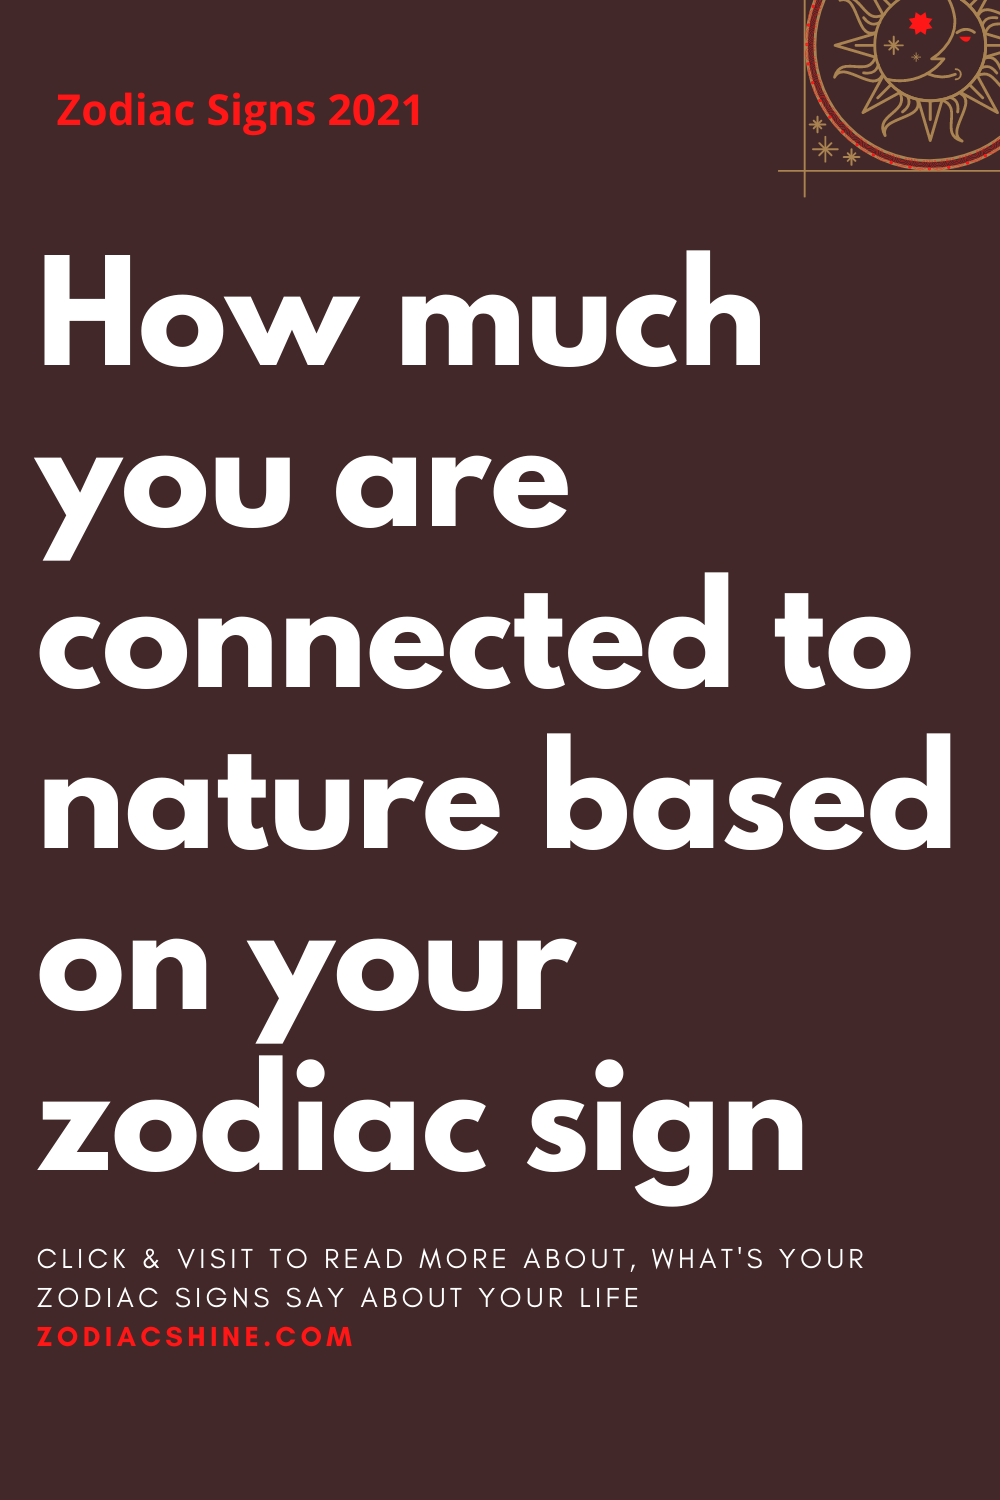 How much you are connected to nature based on your zodiac sign